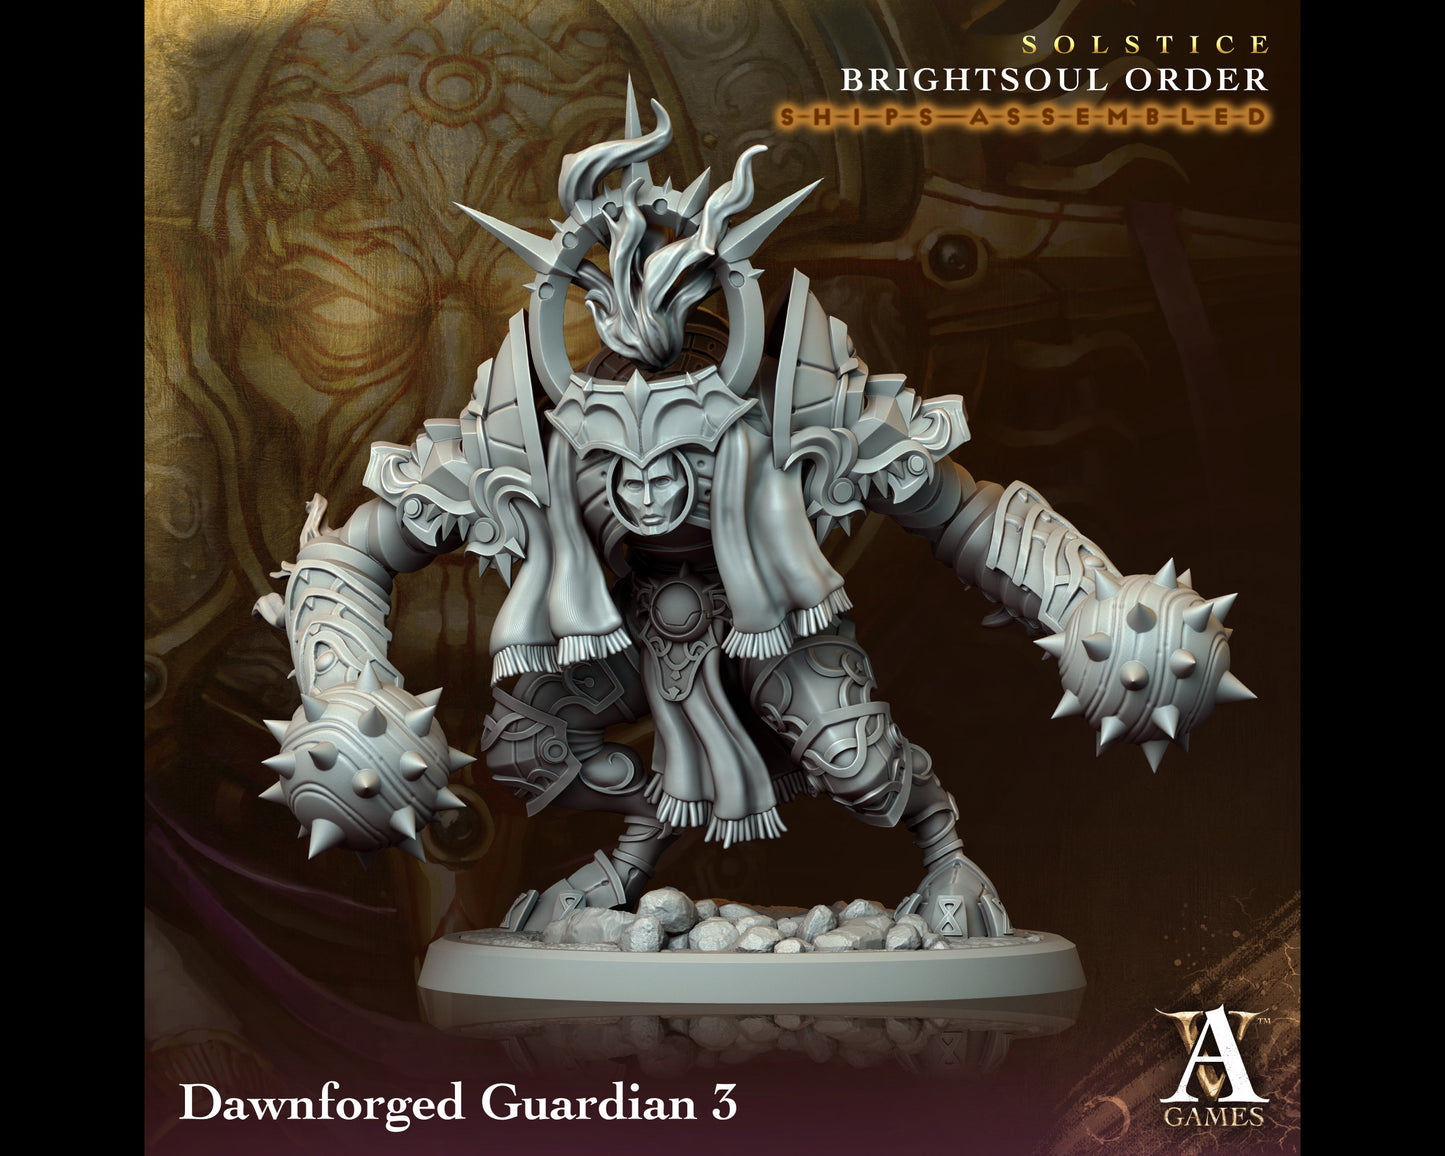 Dawnforged Guardian 3 - Brightsoul Order - Highly Detailed Resin 8k 3D Printed Miniature